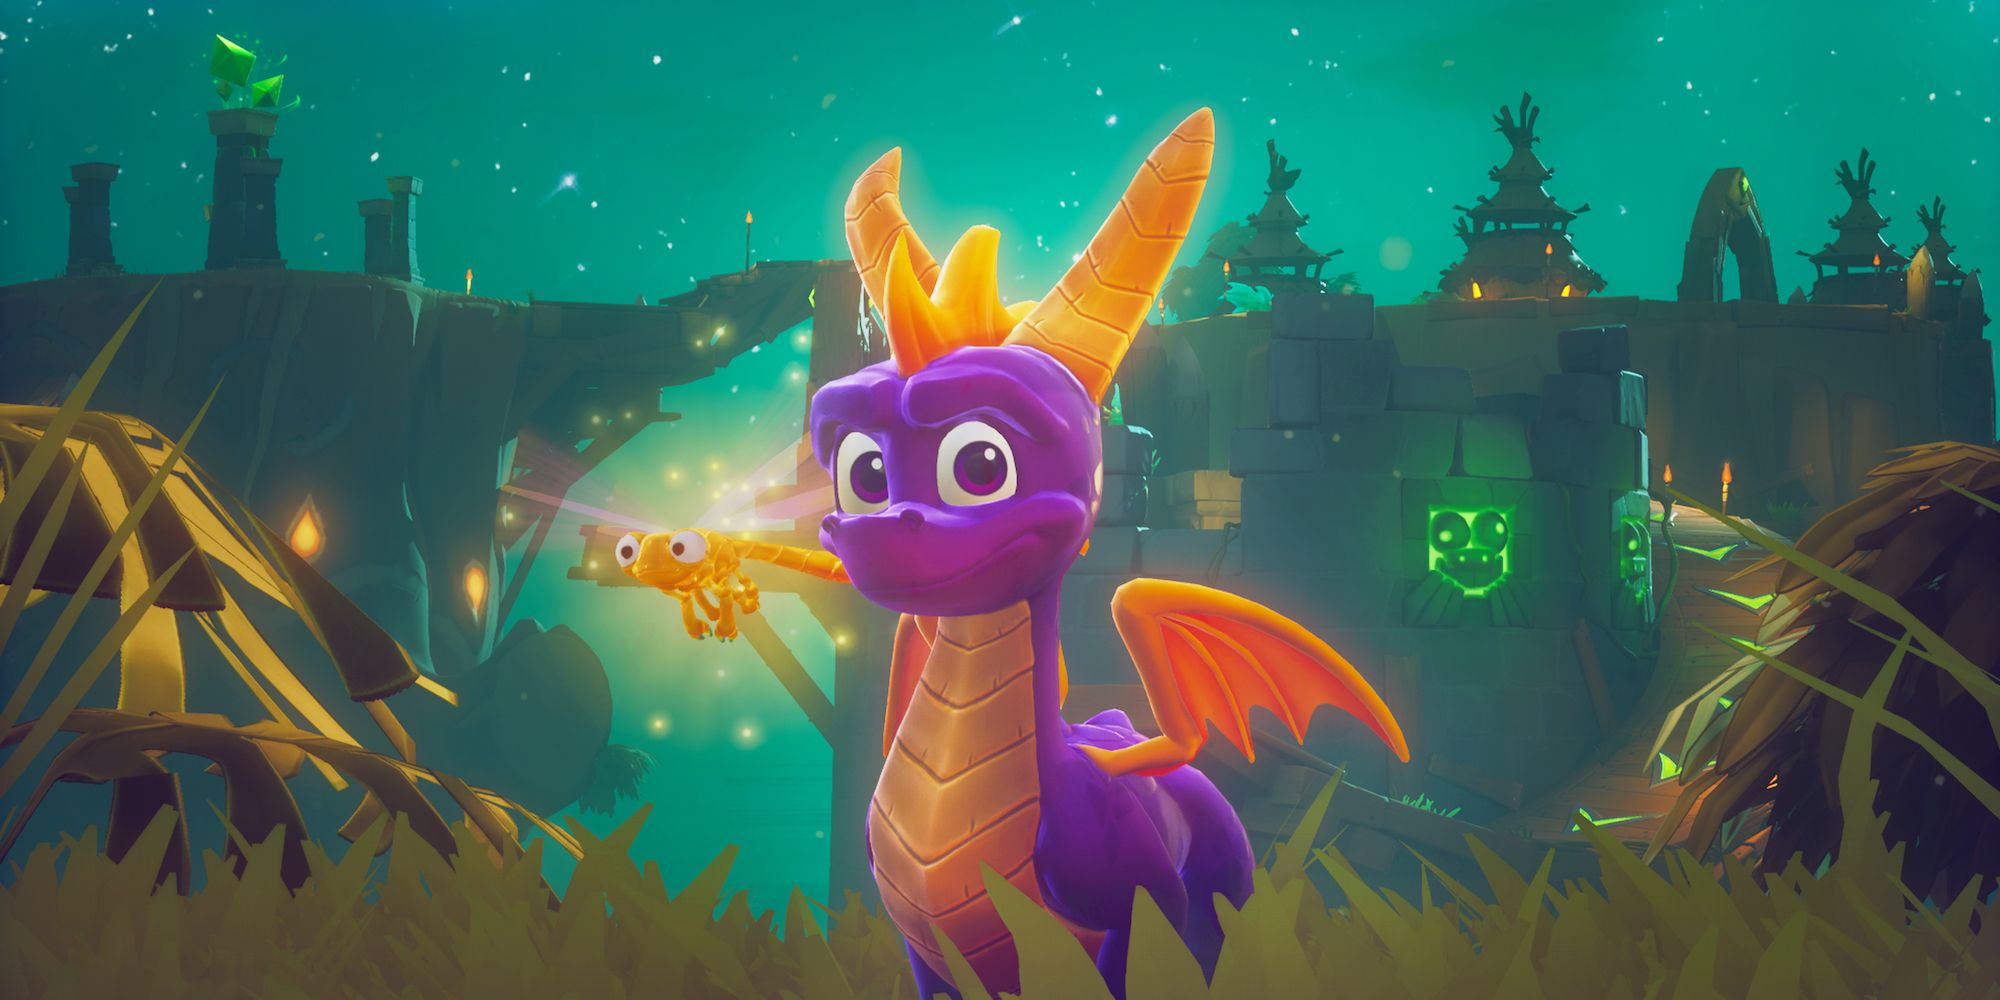 Spyro the Dragon can remain relevant today